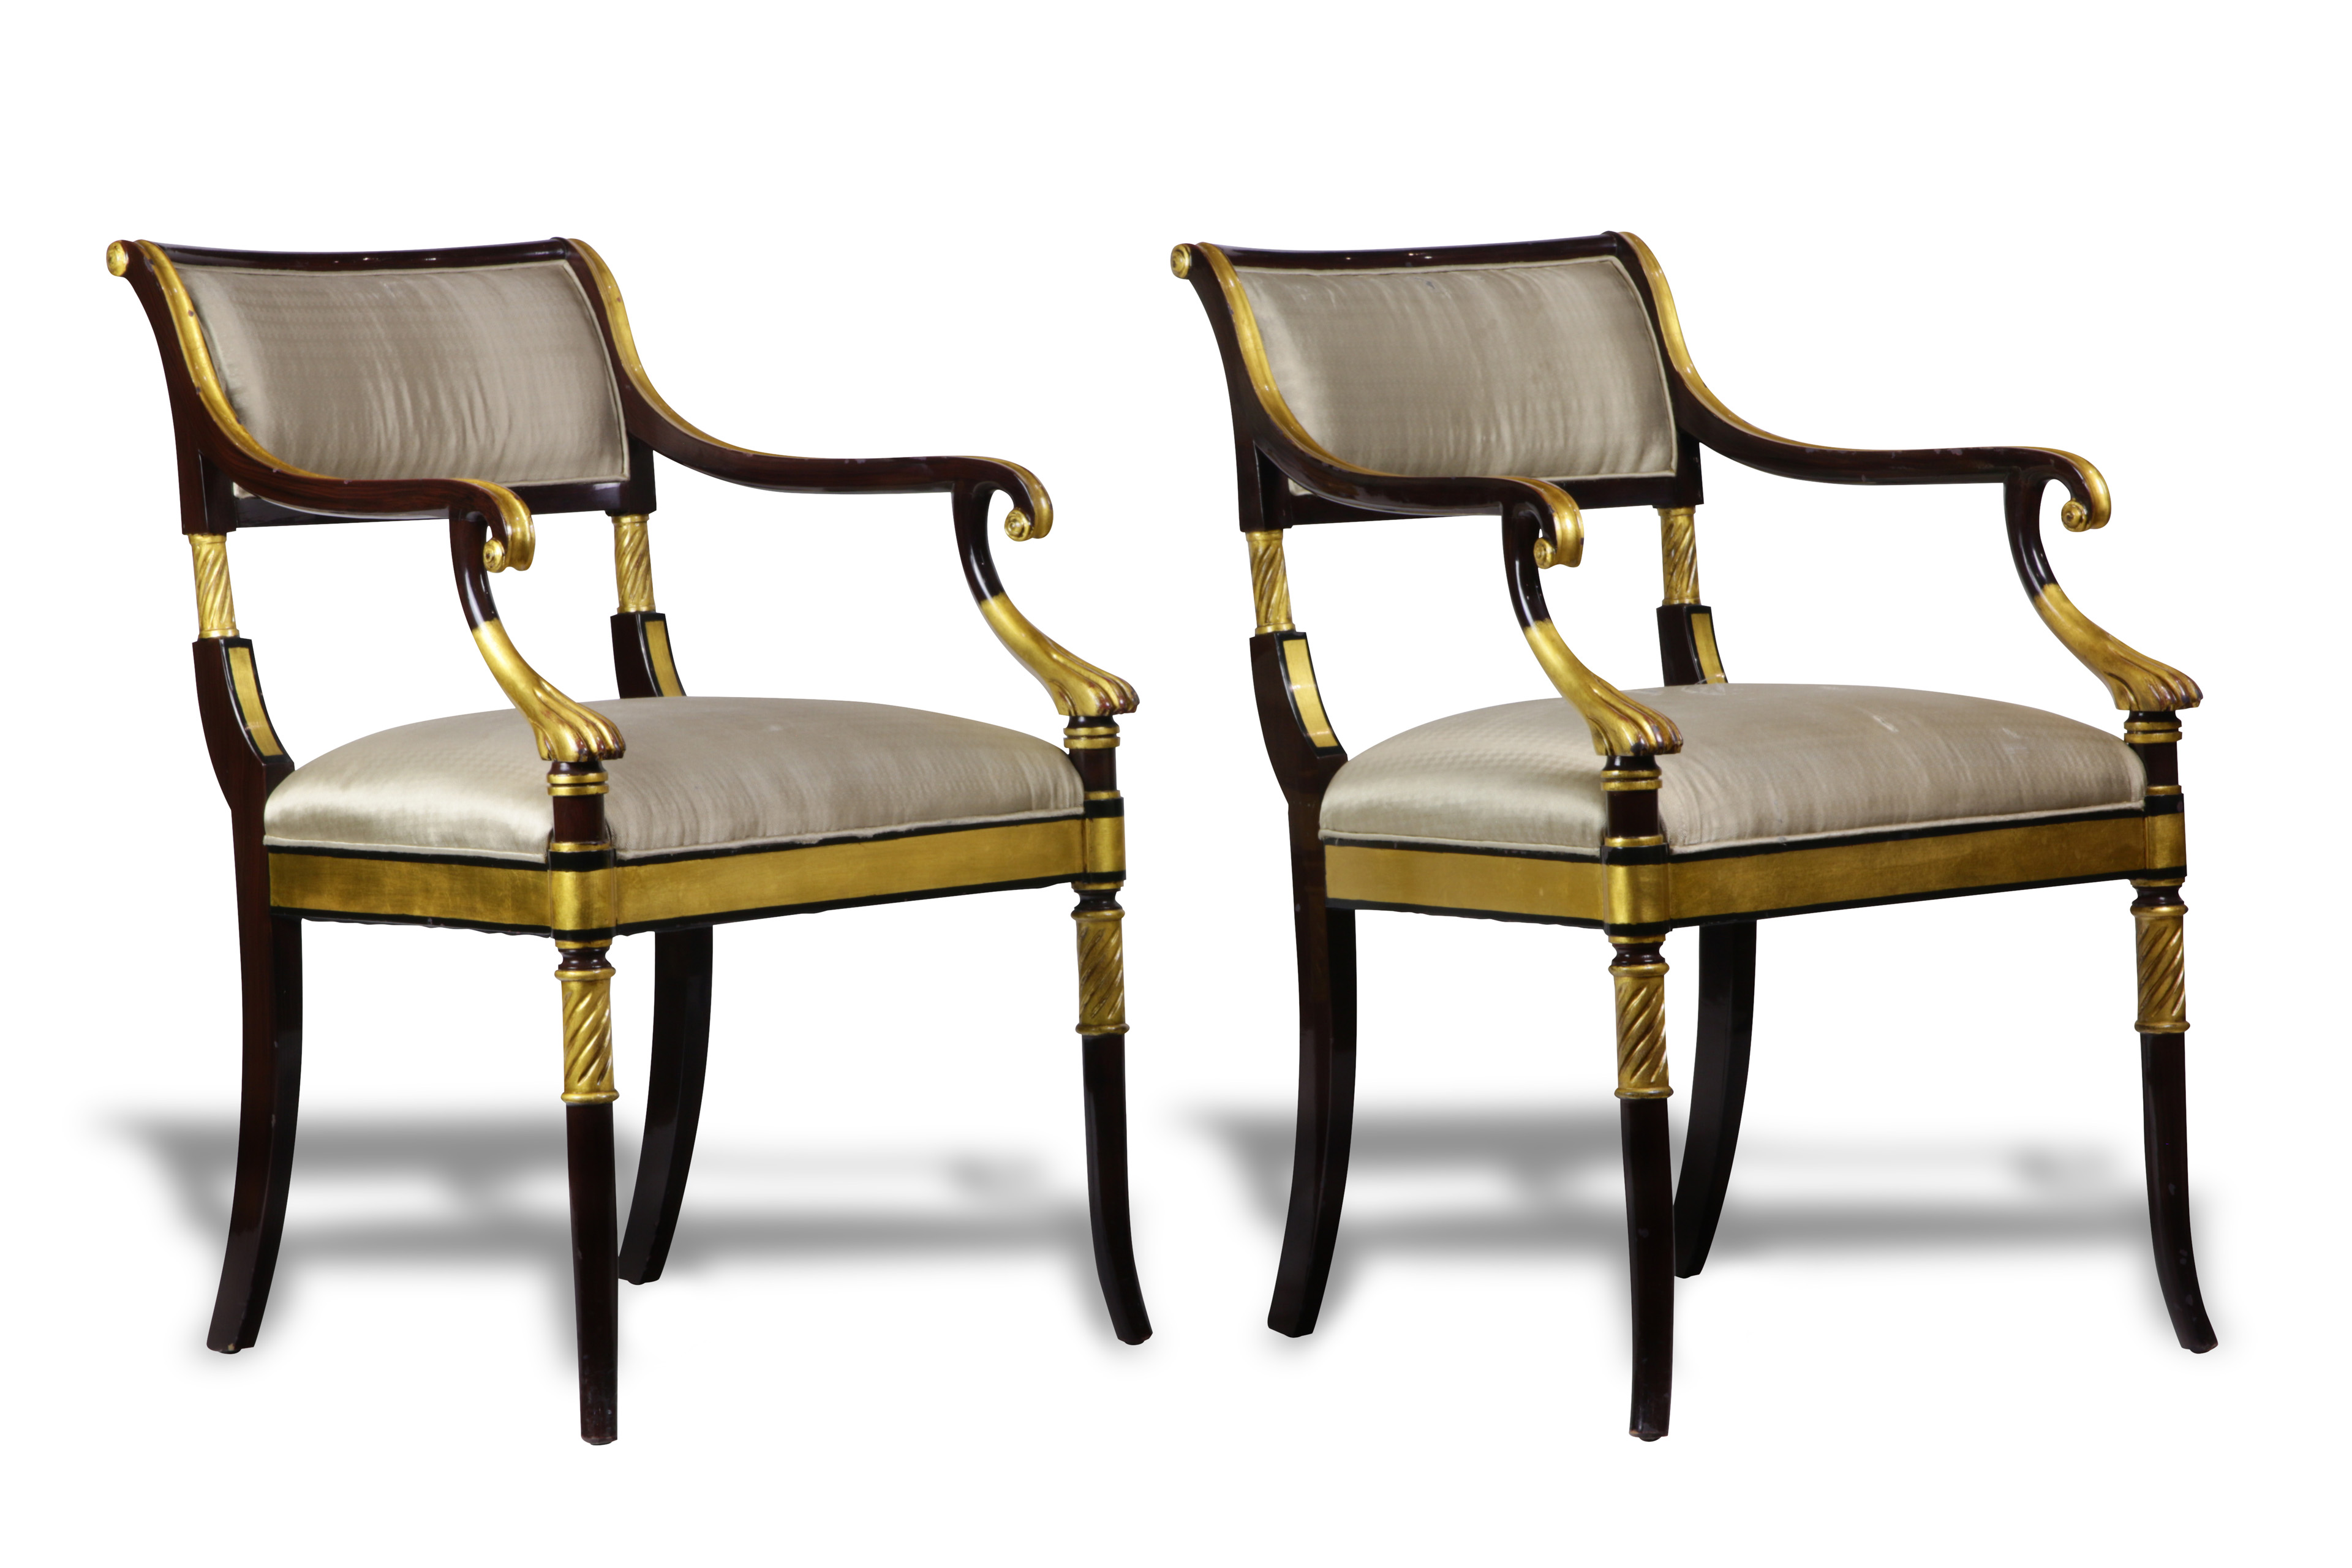 PAIR OF ENGLISH REGENCY STYLE PARTIAL 3a4c9f